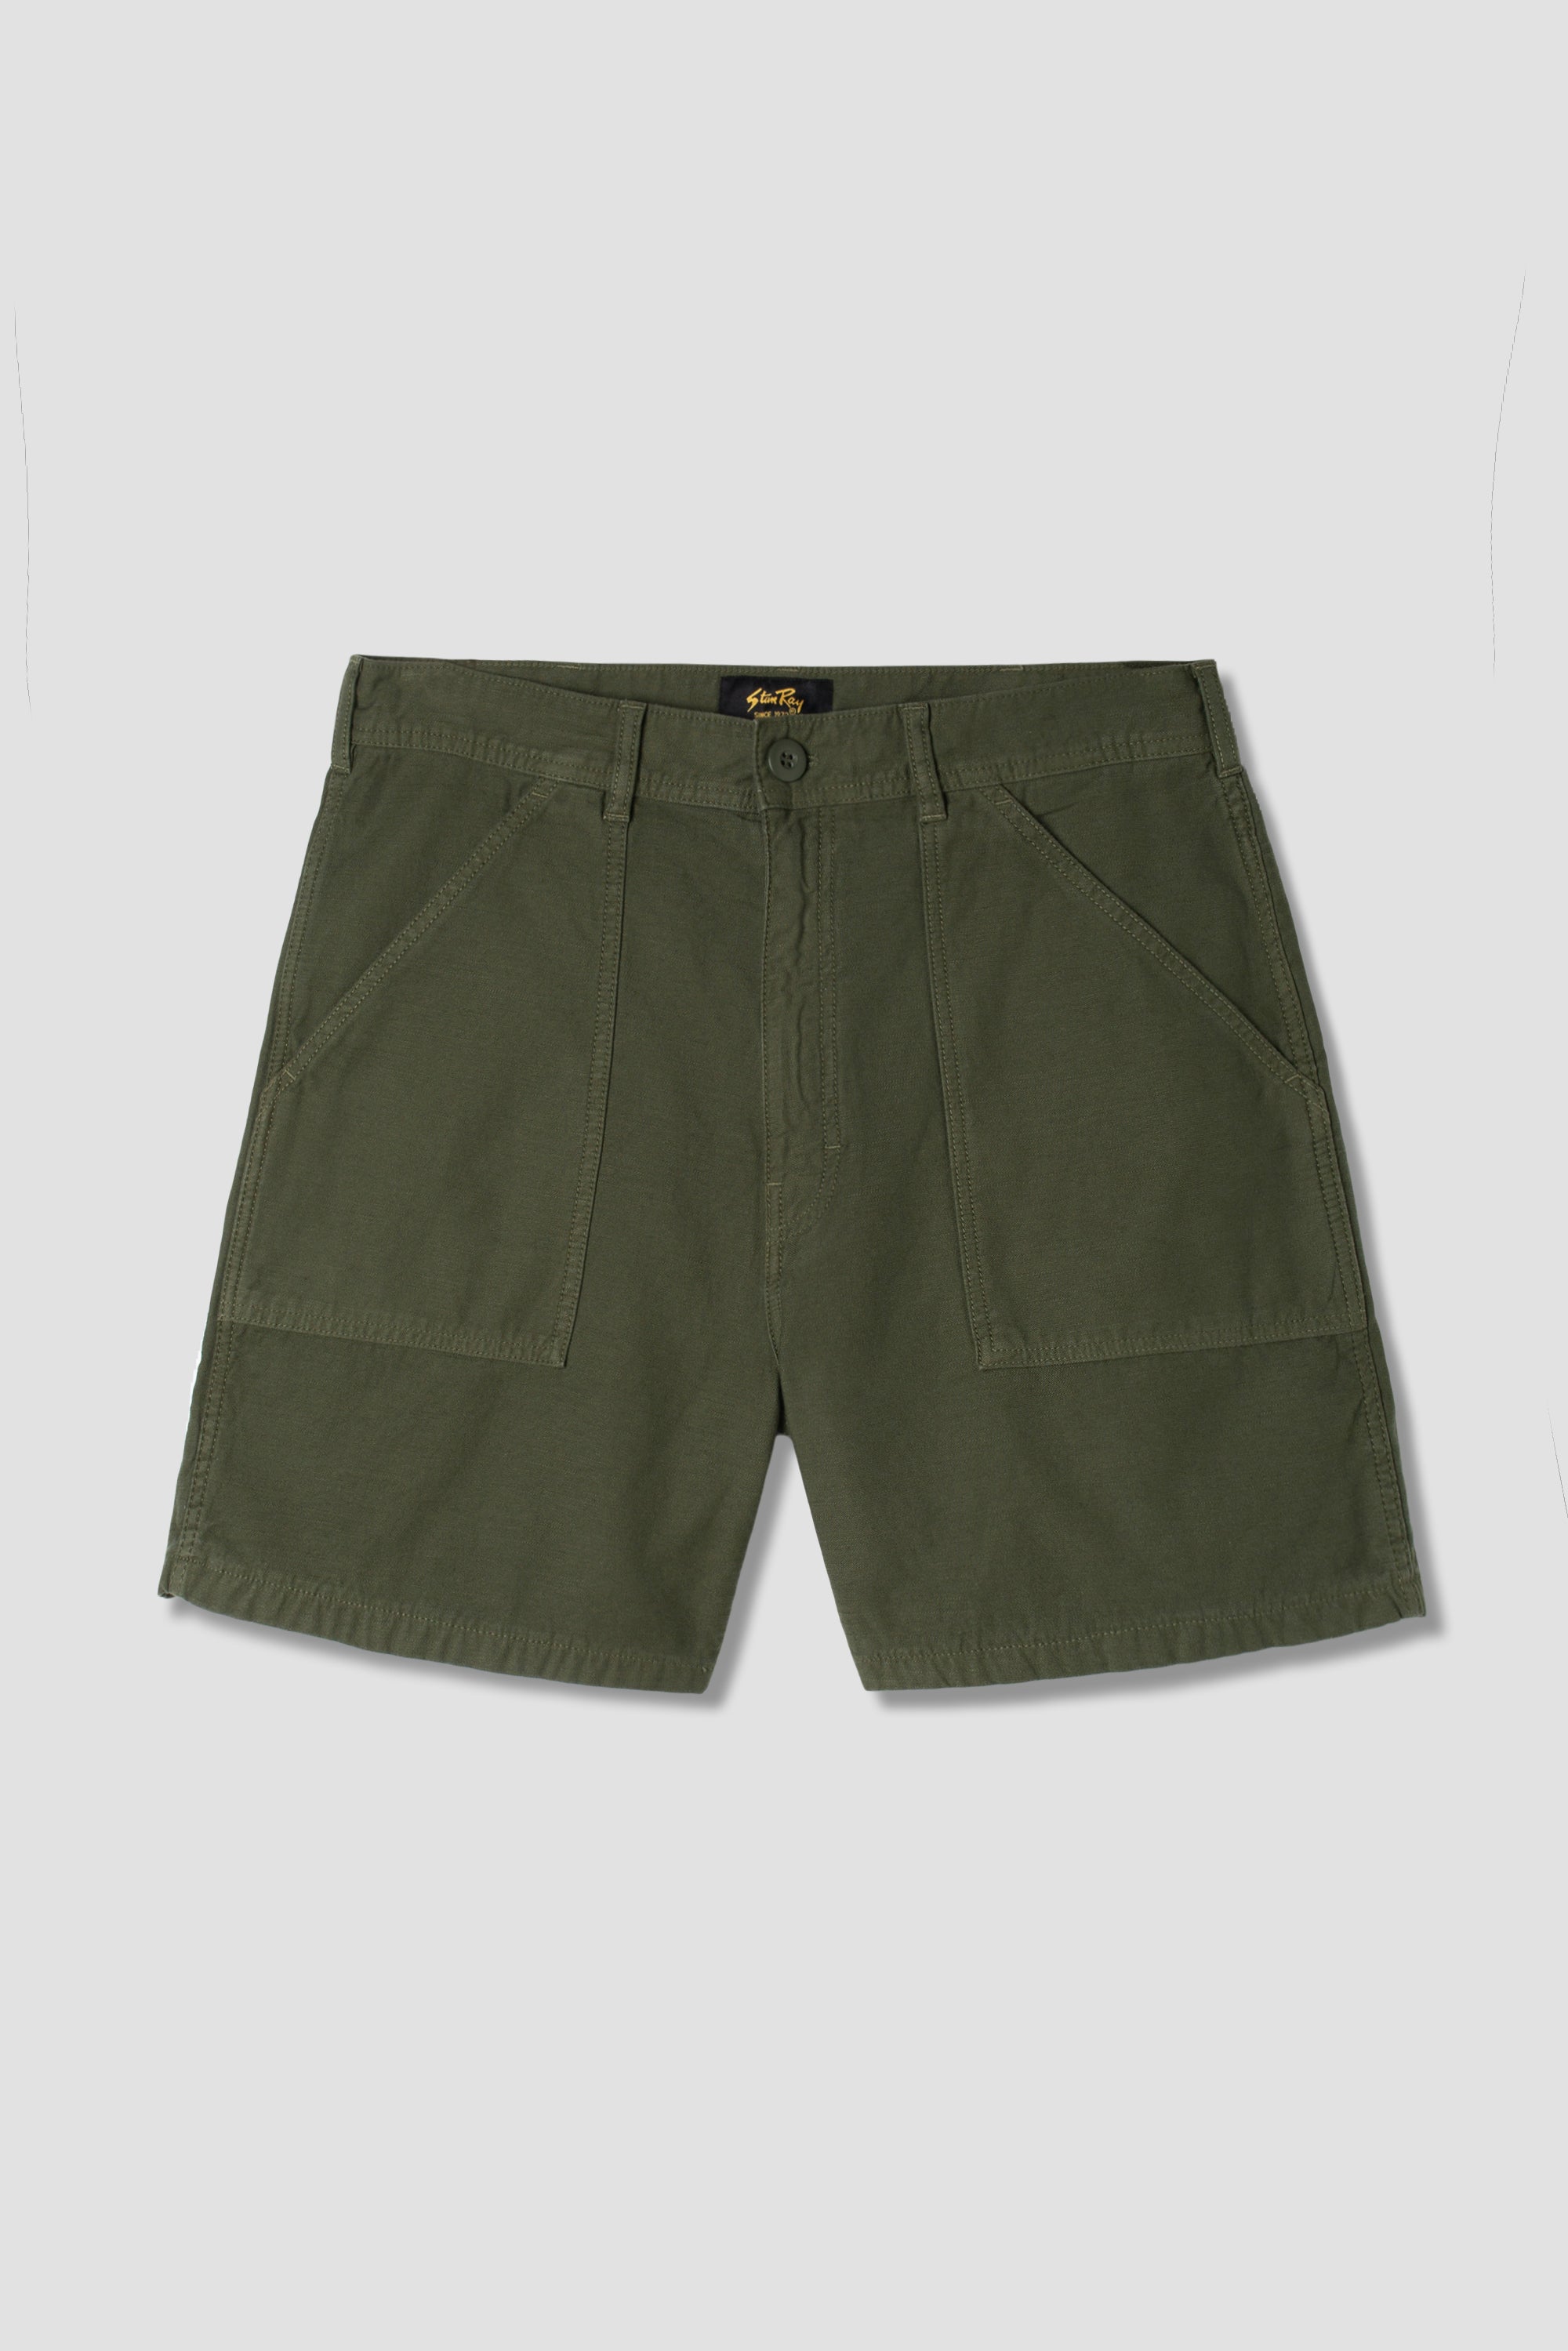 Fat Short (Olive) – Stan Ray